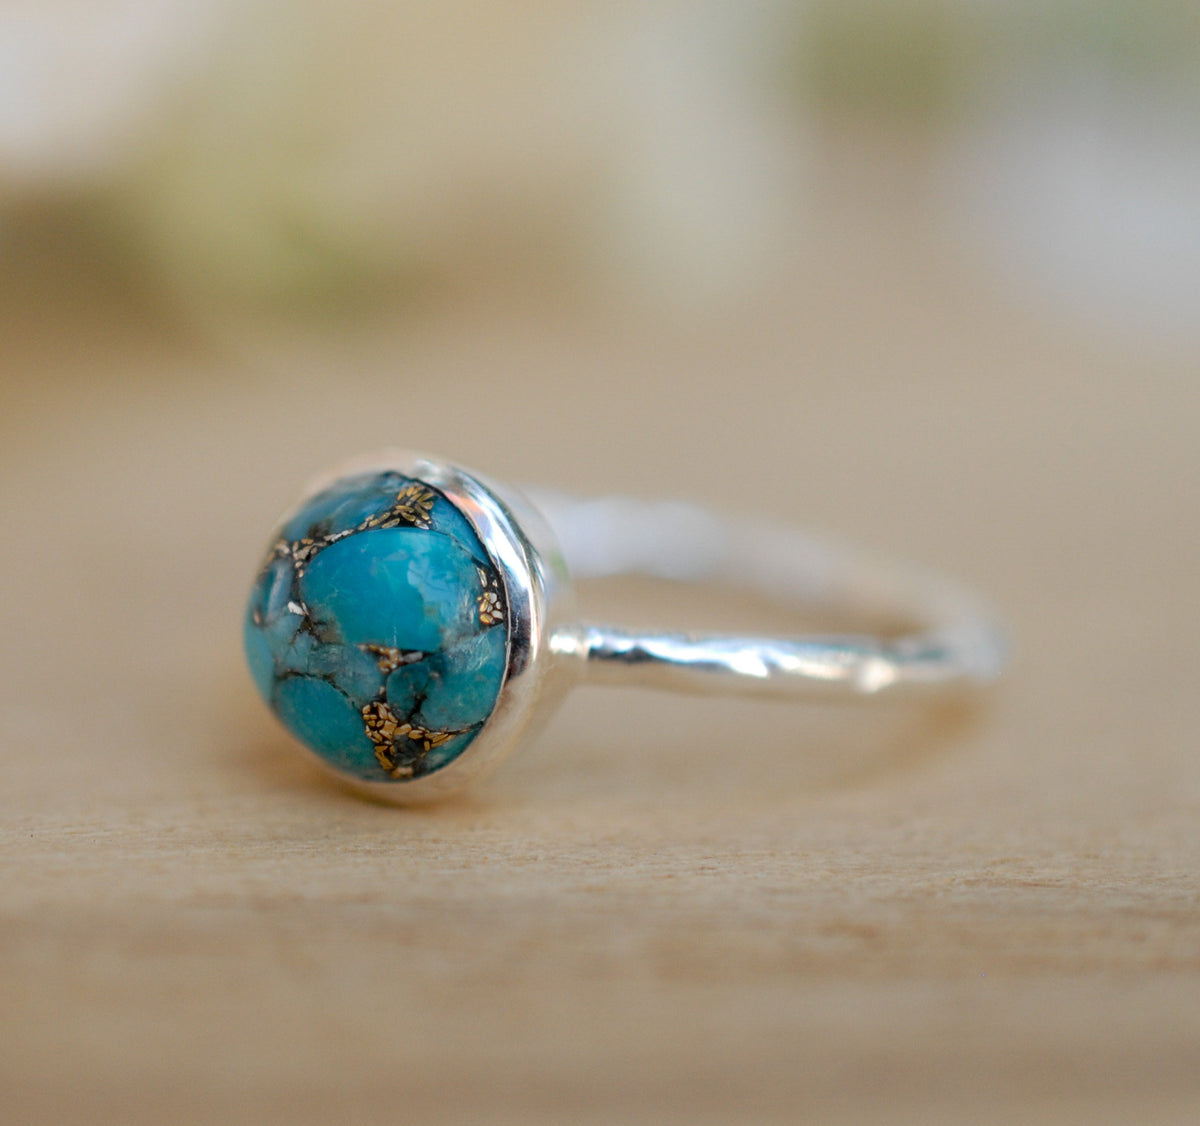 Turquoise Ring* Silver Ring * Boho Ring* Blue Ring * Gypsy Ring * Handmade * Hippie * Sterling Silver Ring * Copper Turquoise Jewelry BJR064